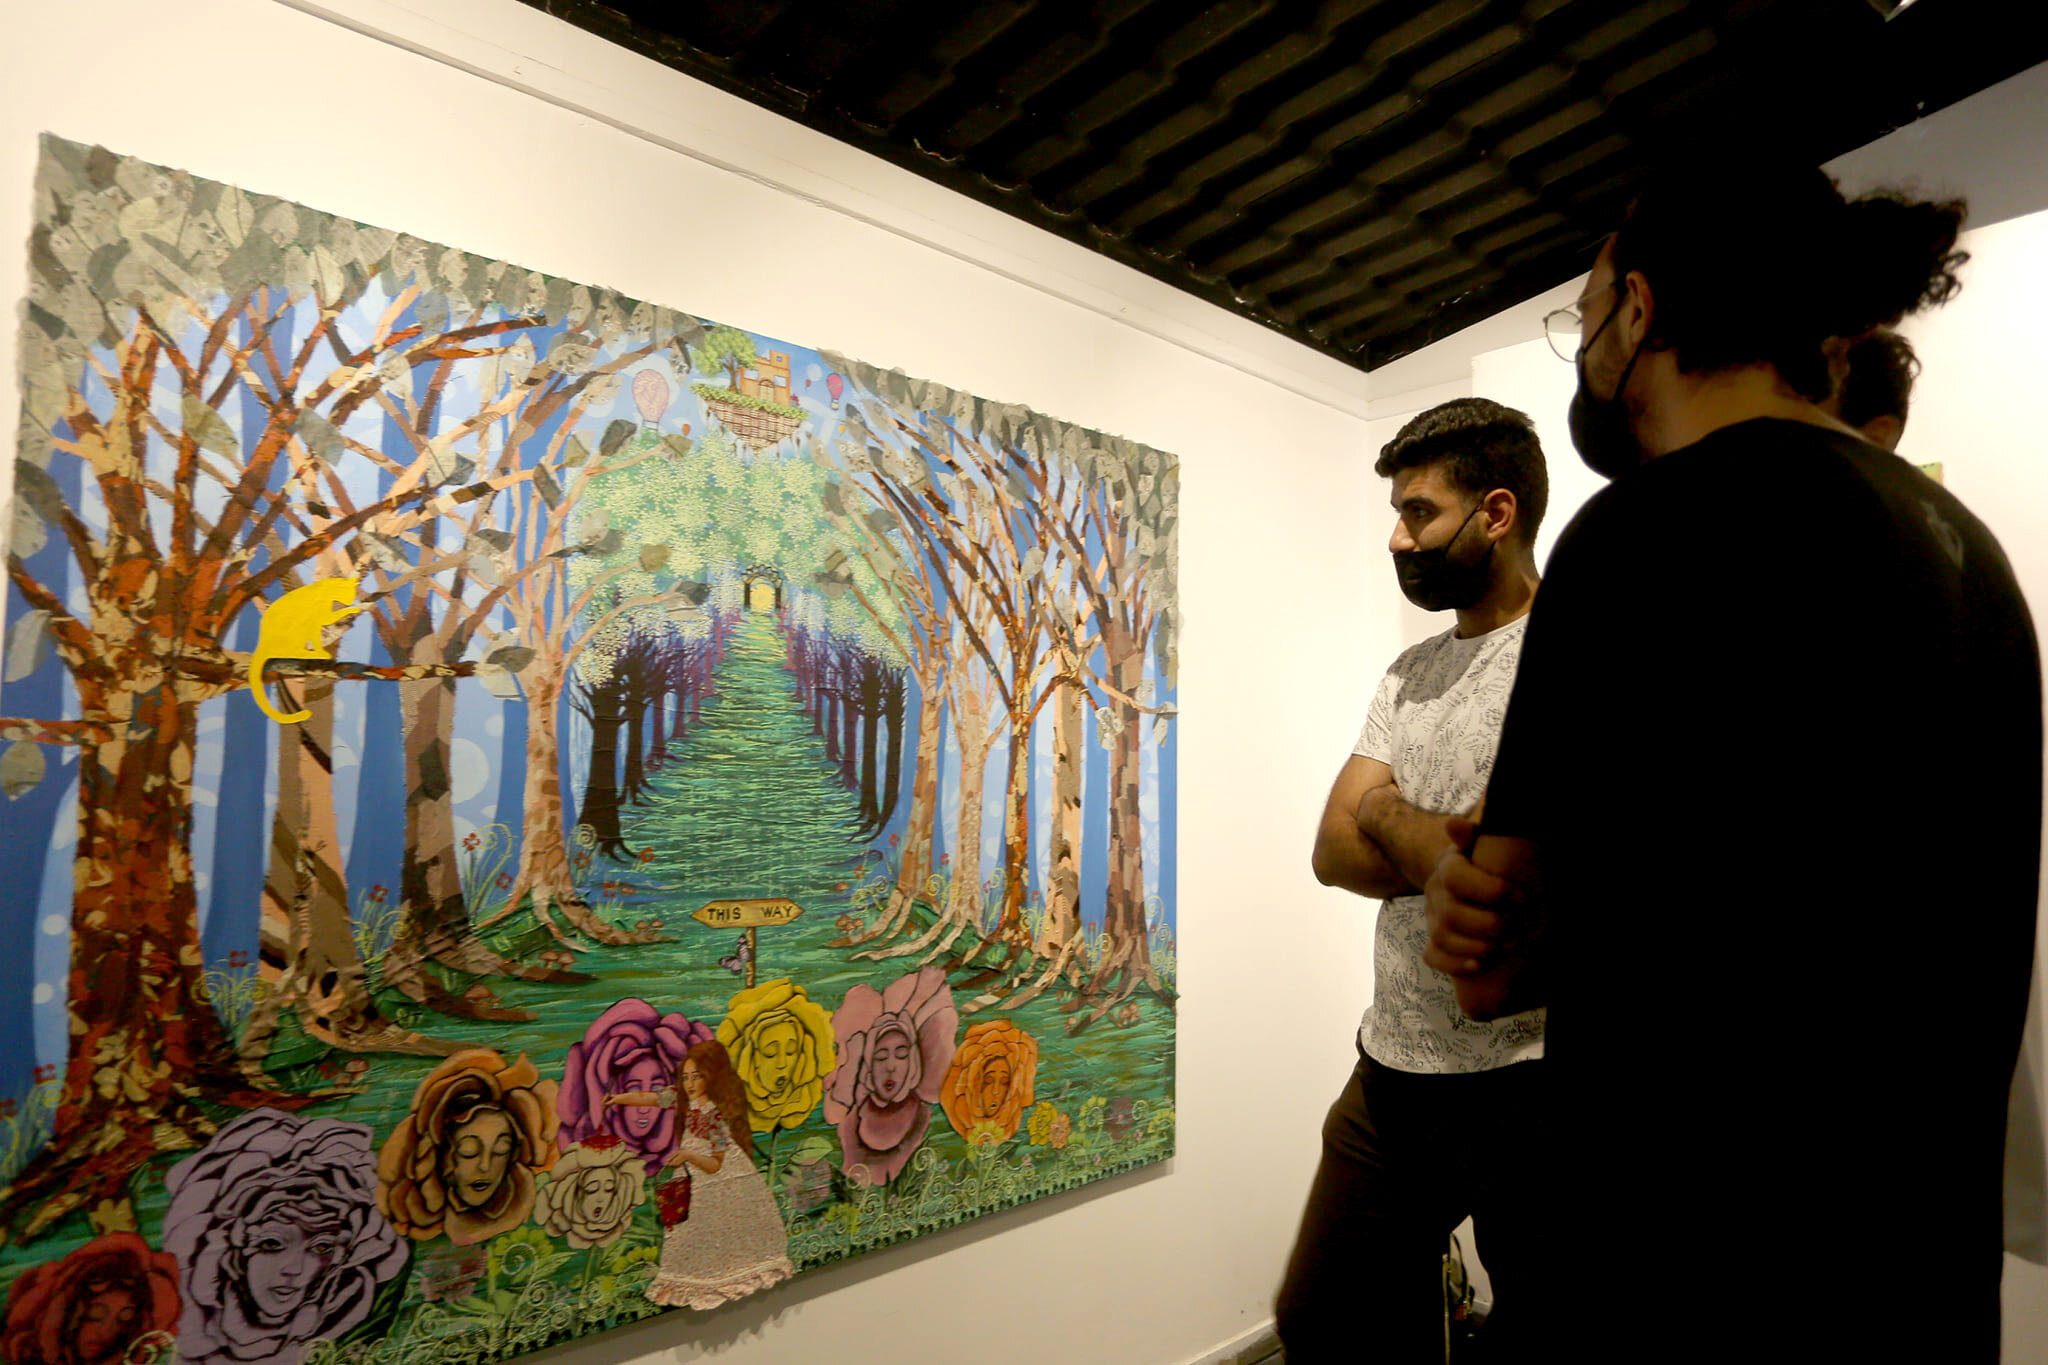 Visitors to the Shababek Gallery view 